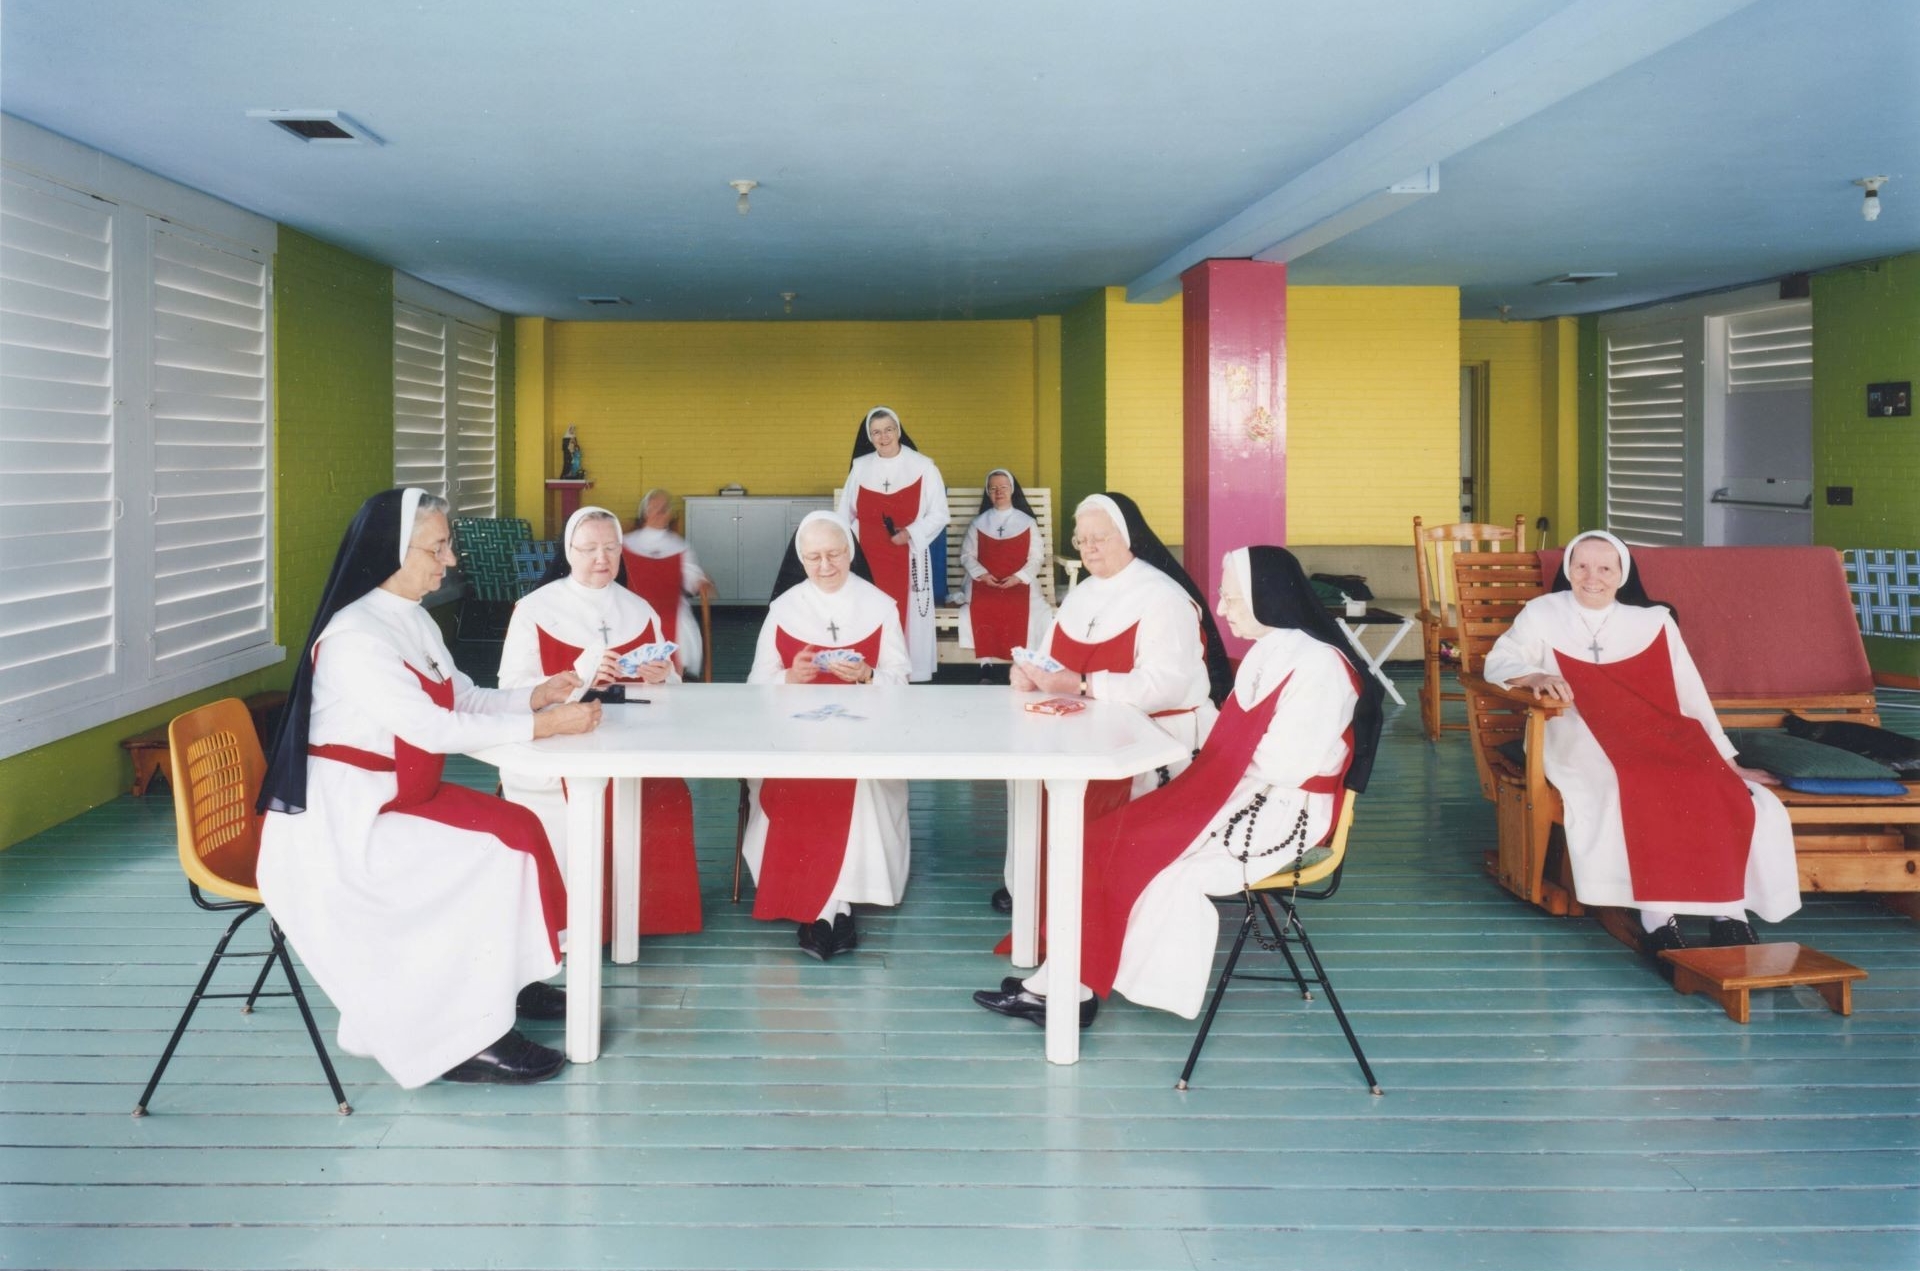 A group of nuns in white and red habits, sitting around a table in a brightly colored room, engaging in activities together.